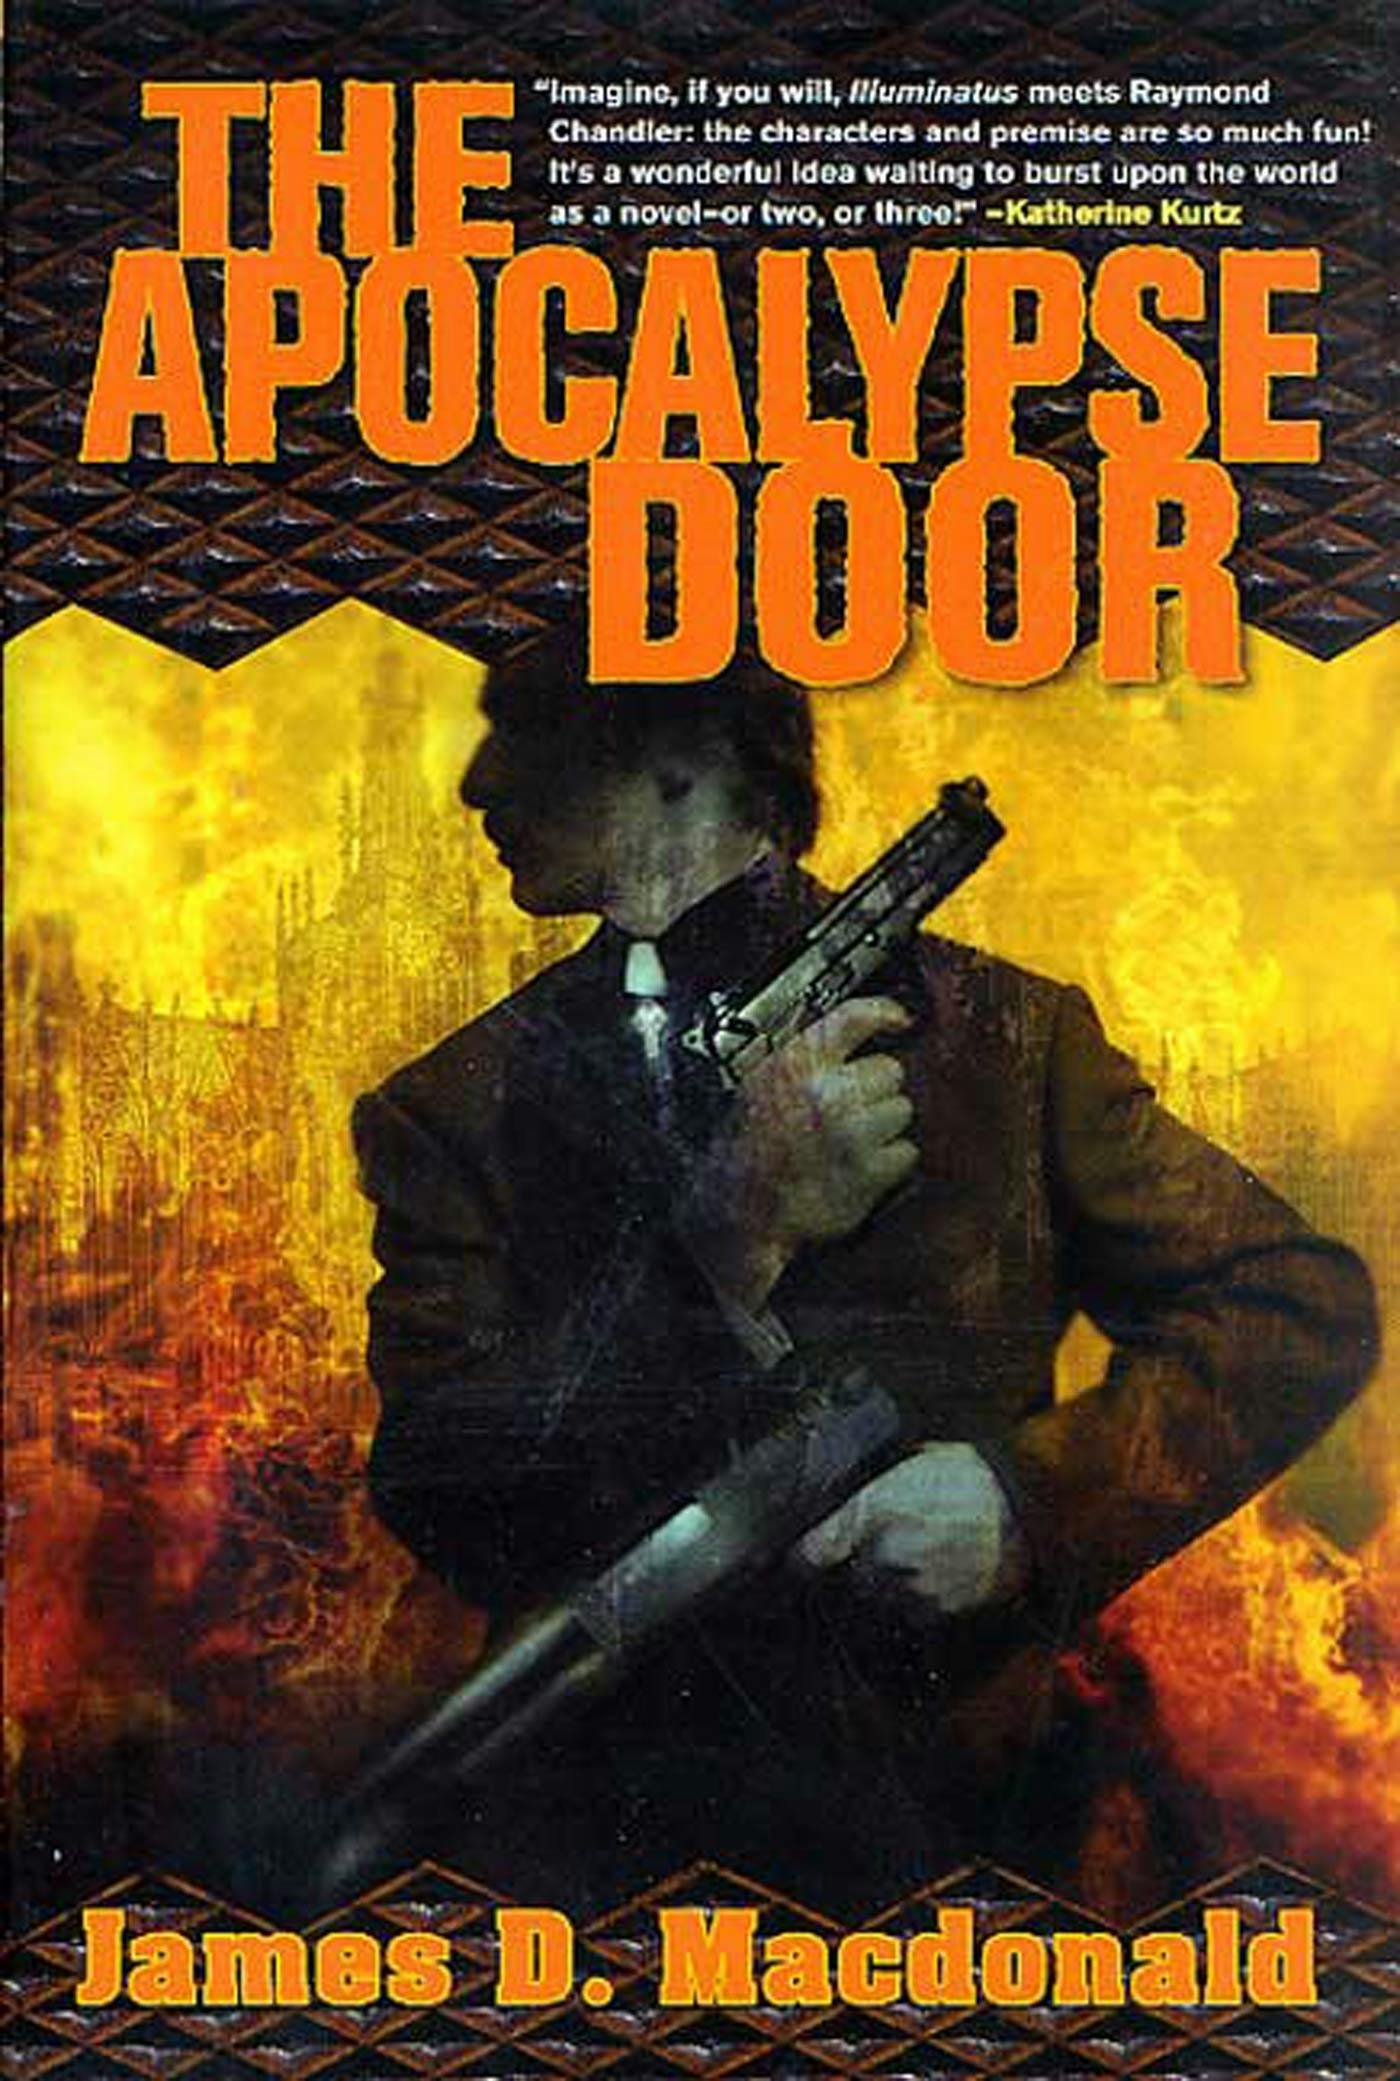 Cover for the book titled as: The Apocalypse Door